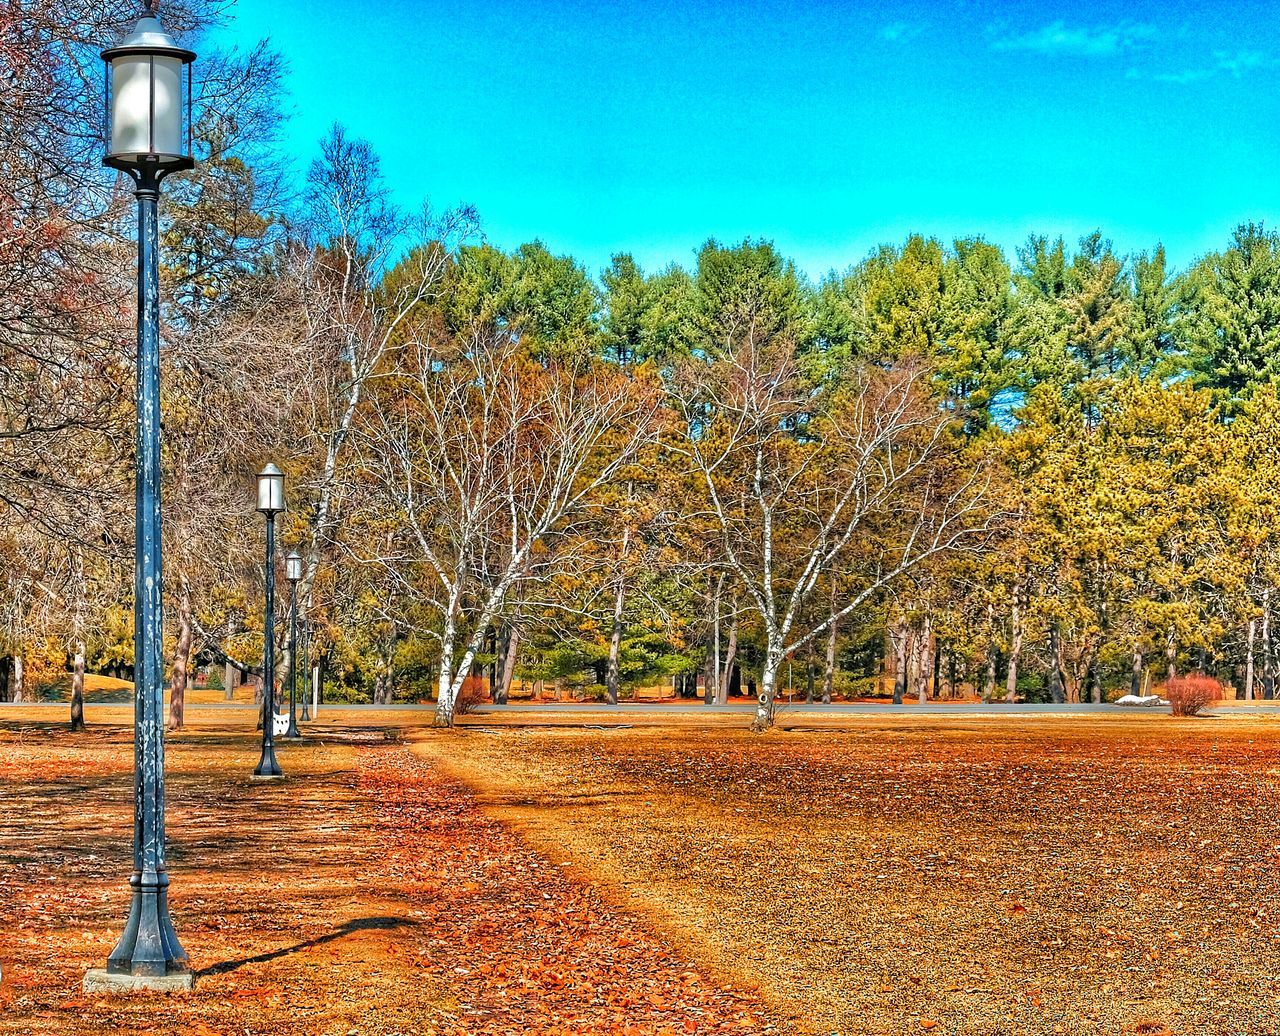 tree, street light, blue, growth, clear sky, the way forward, nature, tranquility, sunlight, lighting equipment, road, sky, flower, park - man made space, beauty in nature, autumn, transportation, outdoors, day, plant